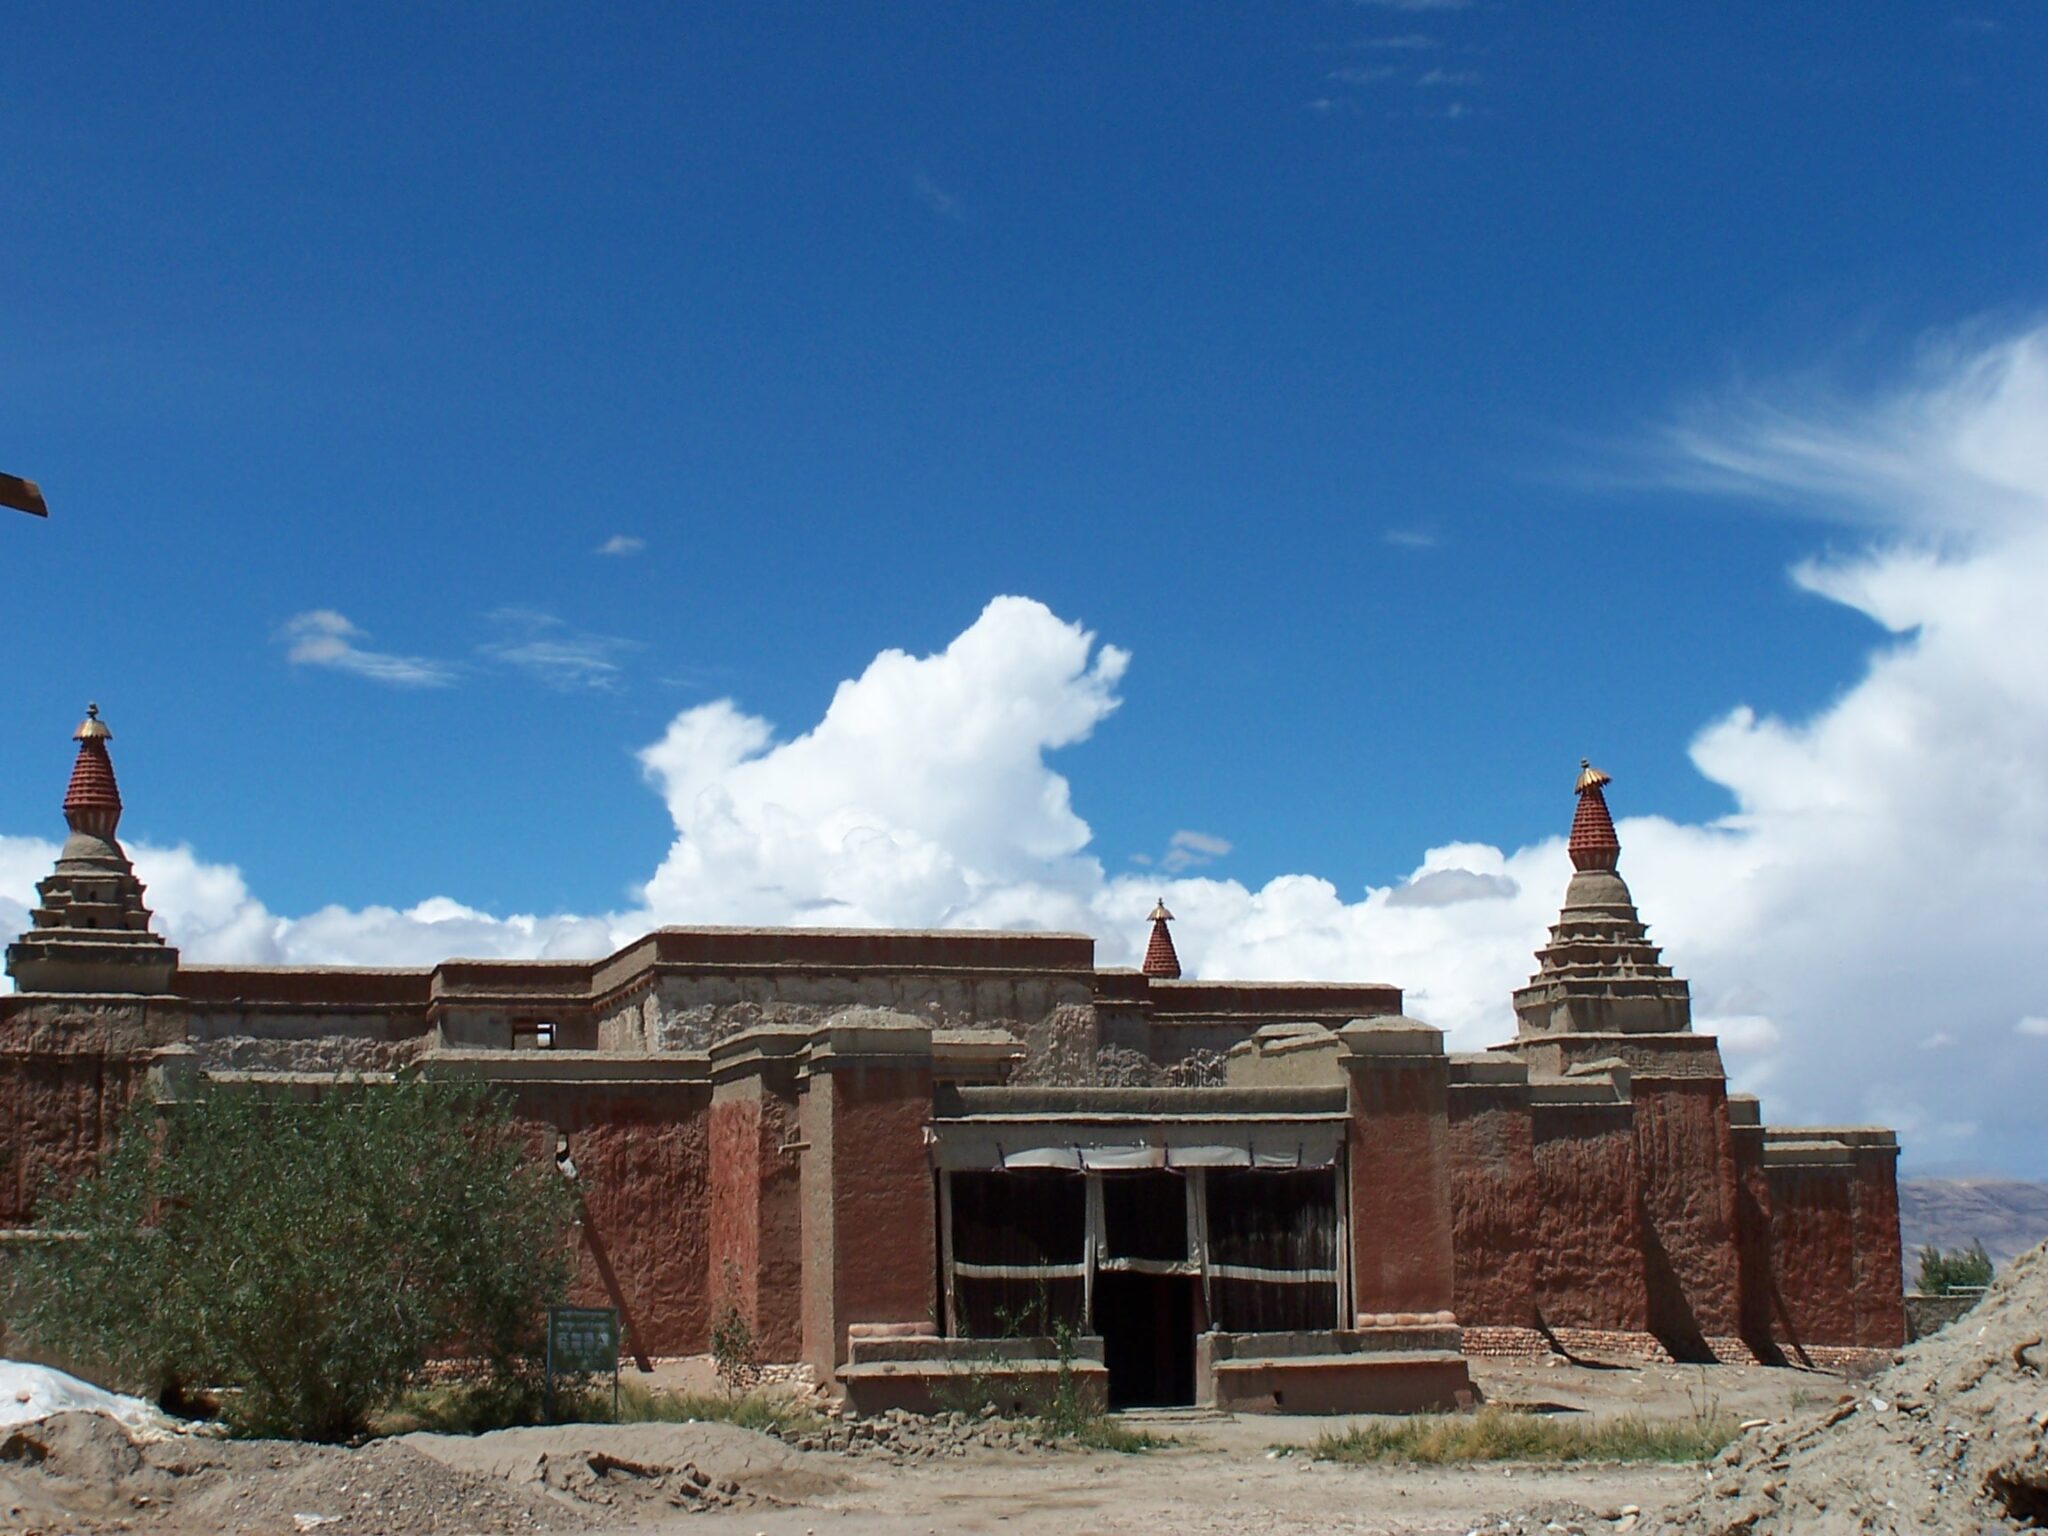 Medium view under blue sky of low-slung rust-red temple building featuring stupas at corners of roof